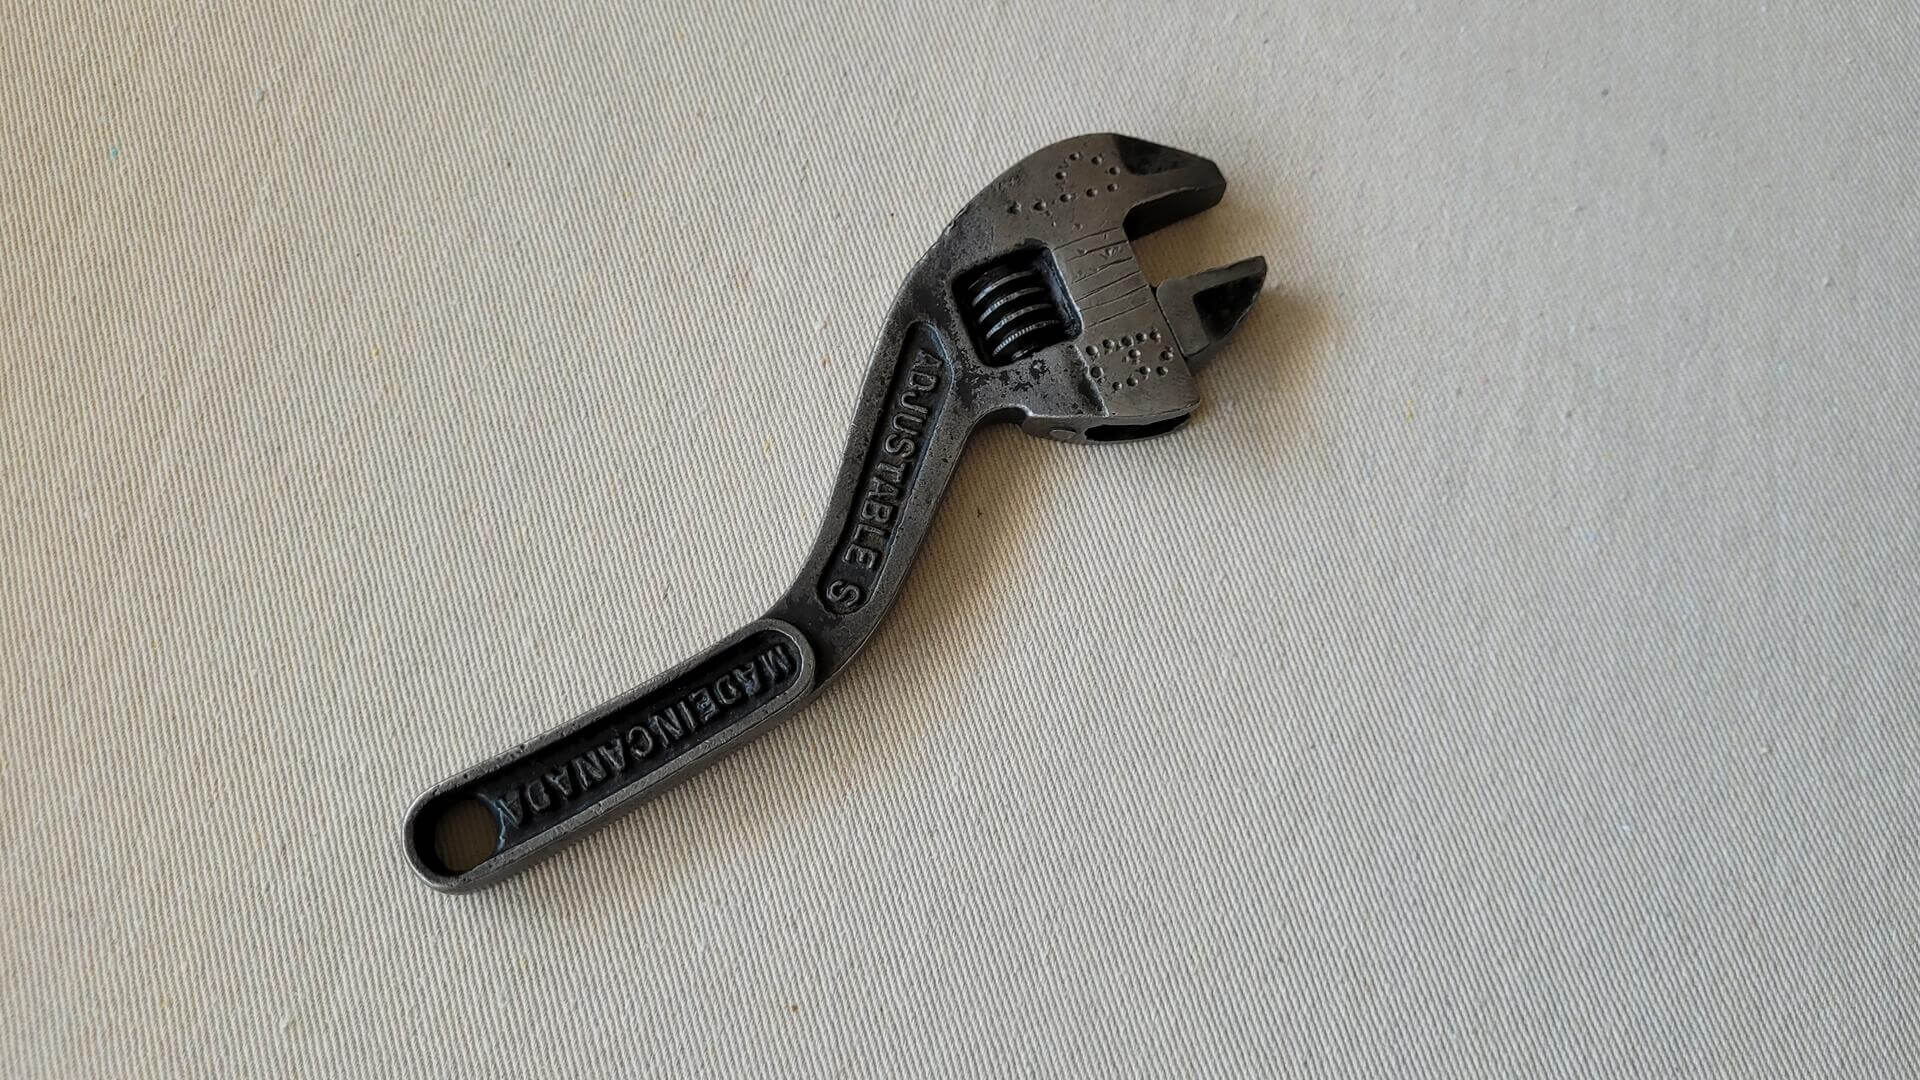 Rare antique 8 inch S curved adjustable wrench forged by McKinnon Industries from St. Catharines, Ontario. Vintage made in Canada collectible plumbing and automotive hand tools